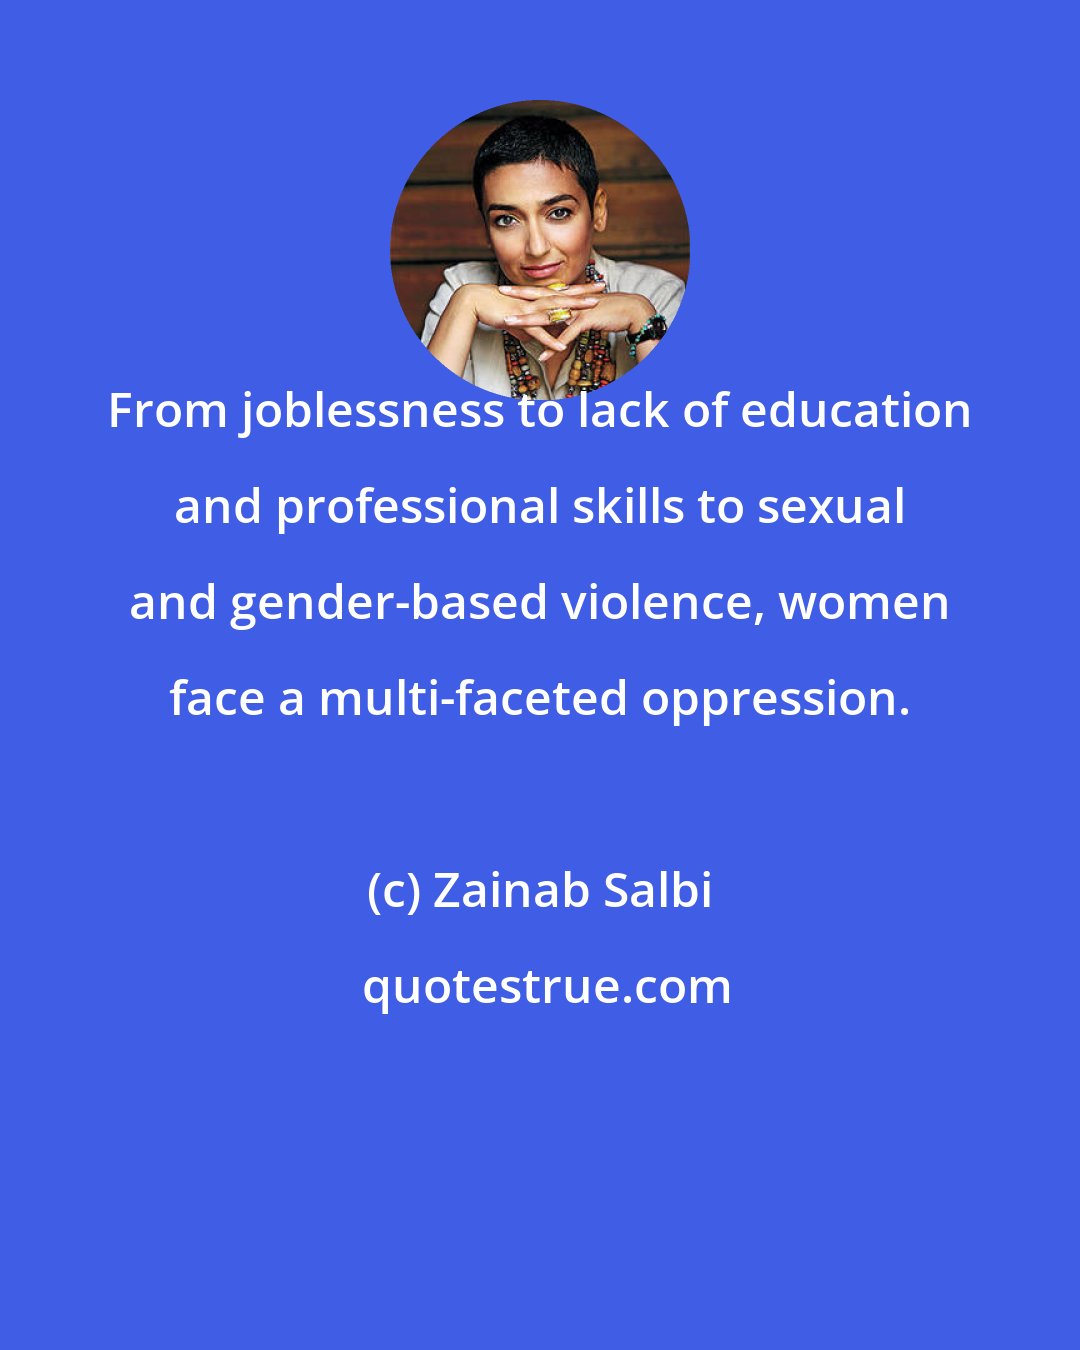 Zainab Salbi: From joblessness to lack of education and professional skills to sexual and gender-based violence, women face a multi-faceted oppression.